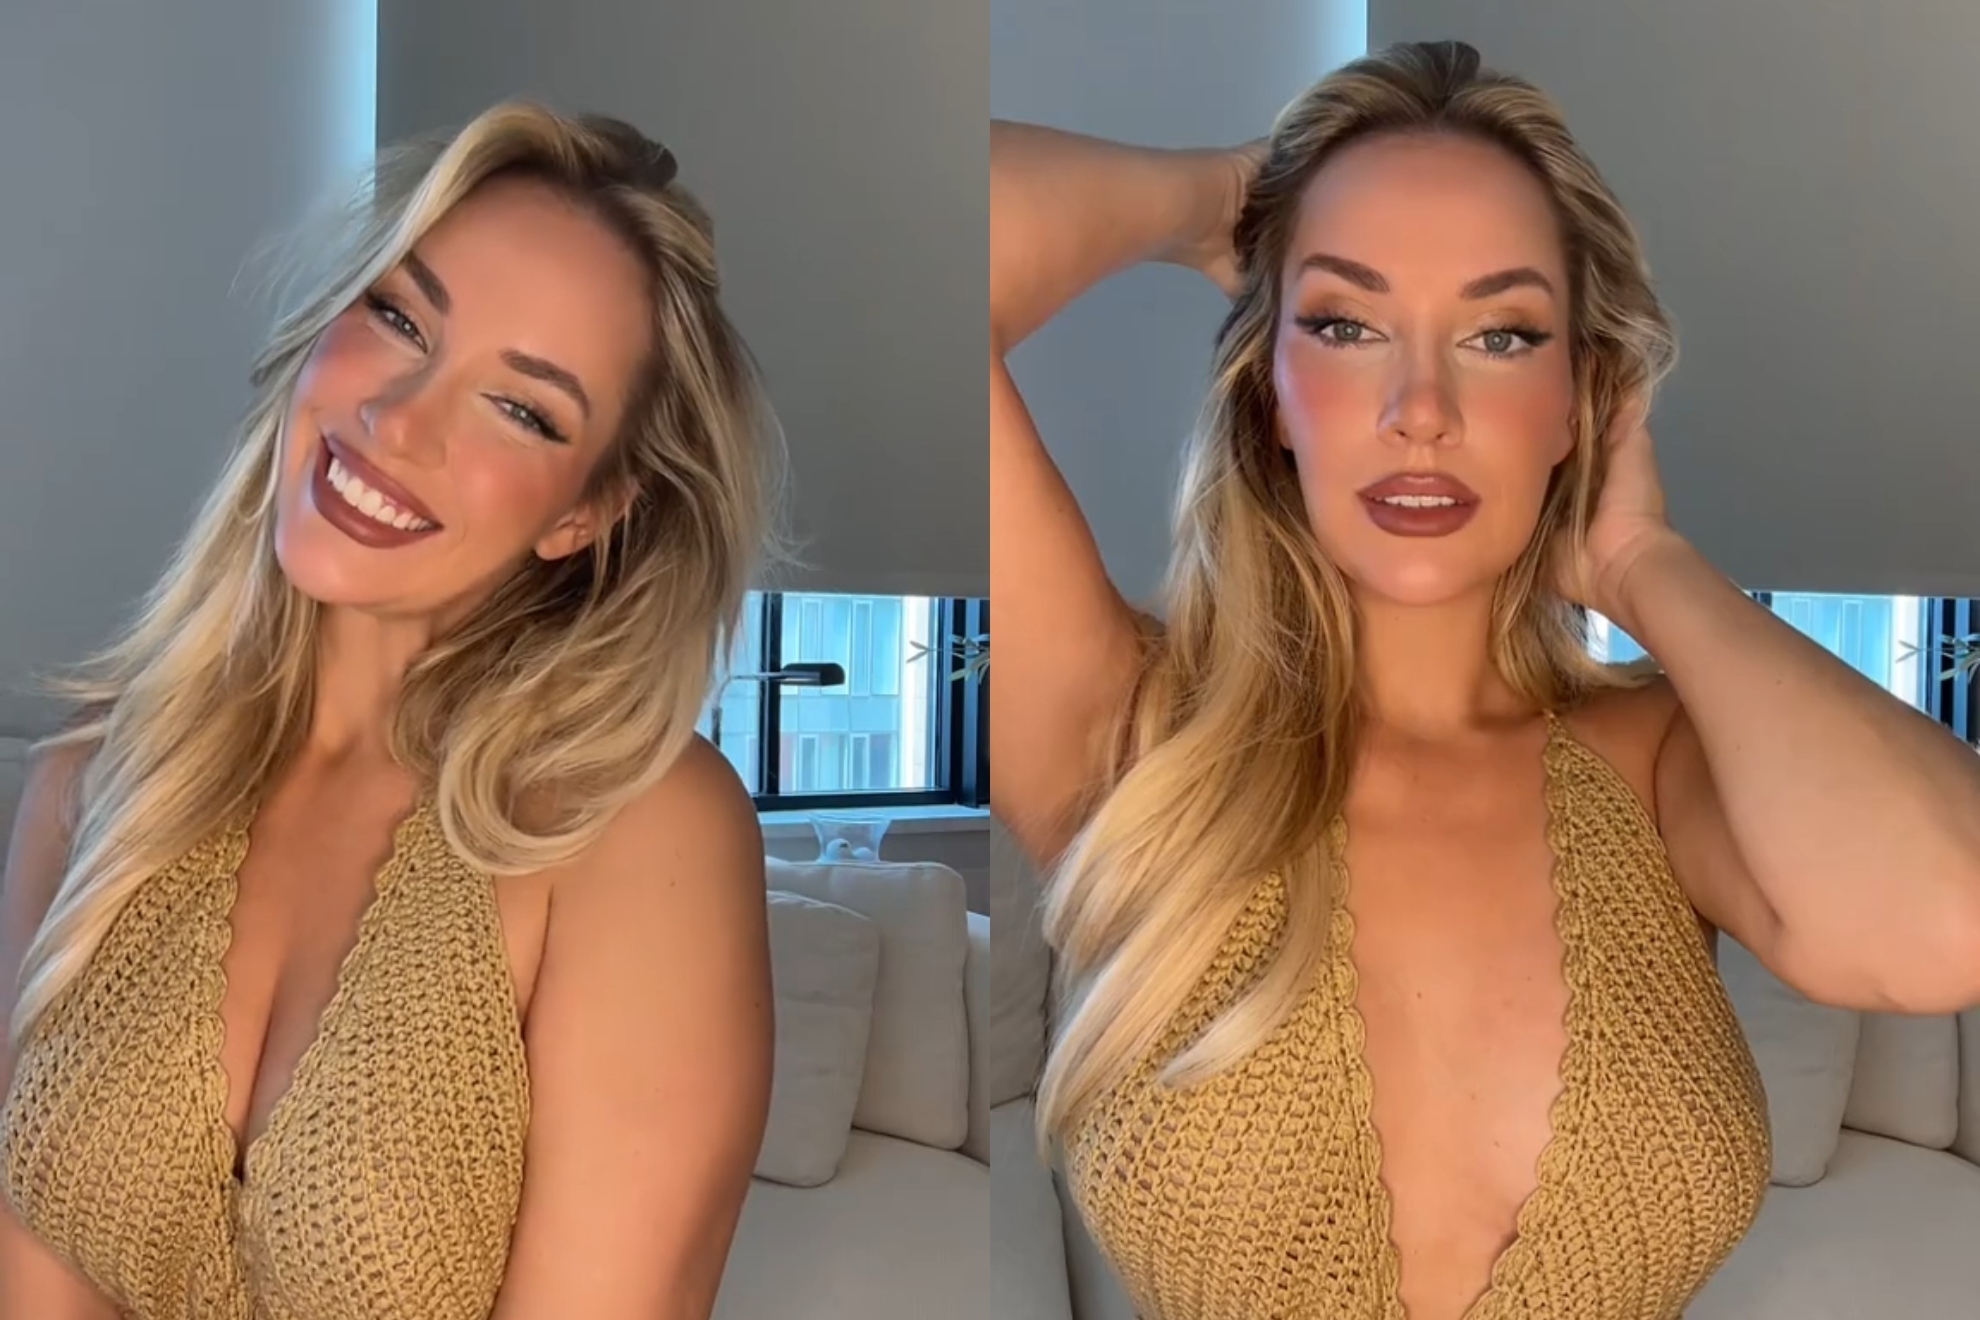 Paige Spiranac's coach praises her swing: She's an incredible athlete